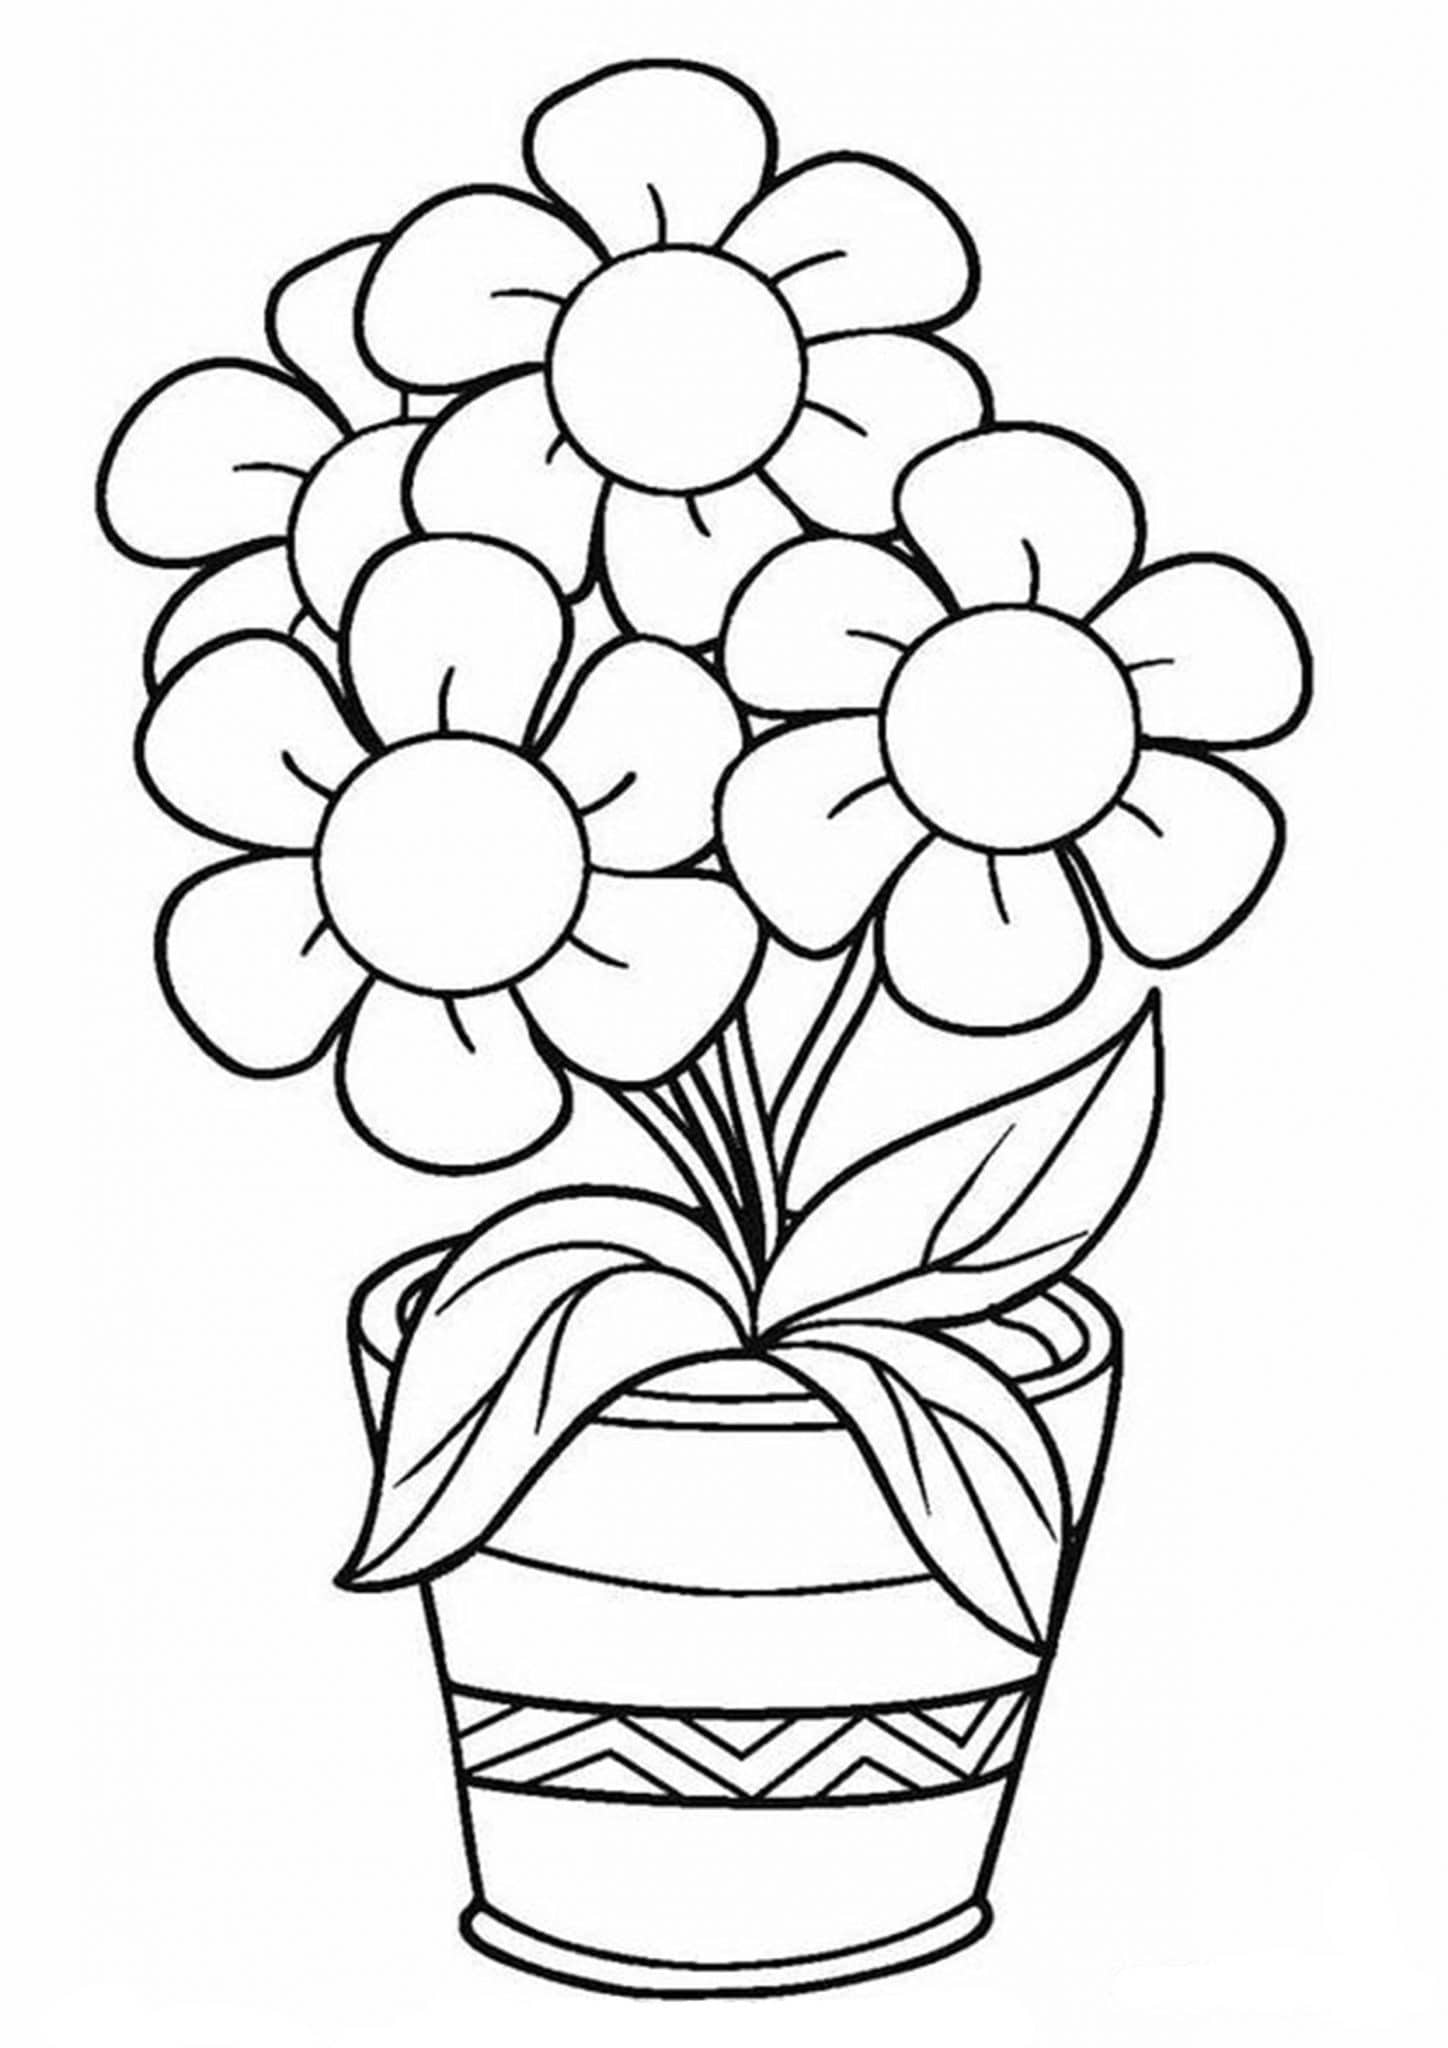 Free easy to print flower coloring pages